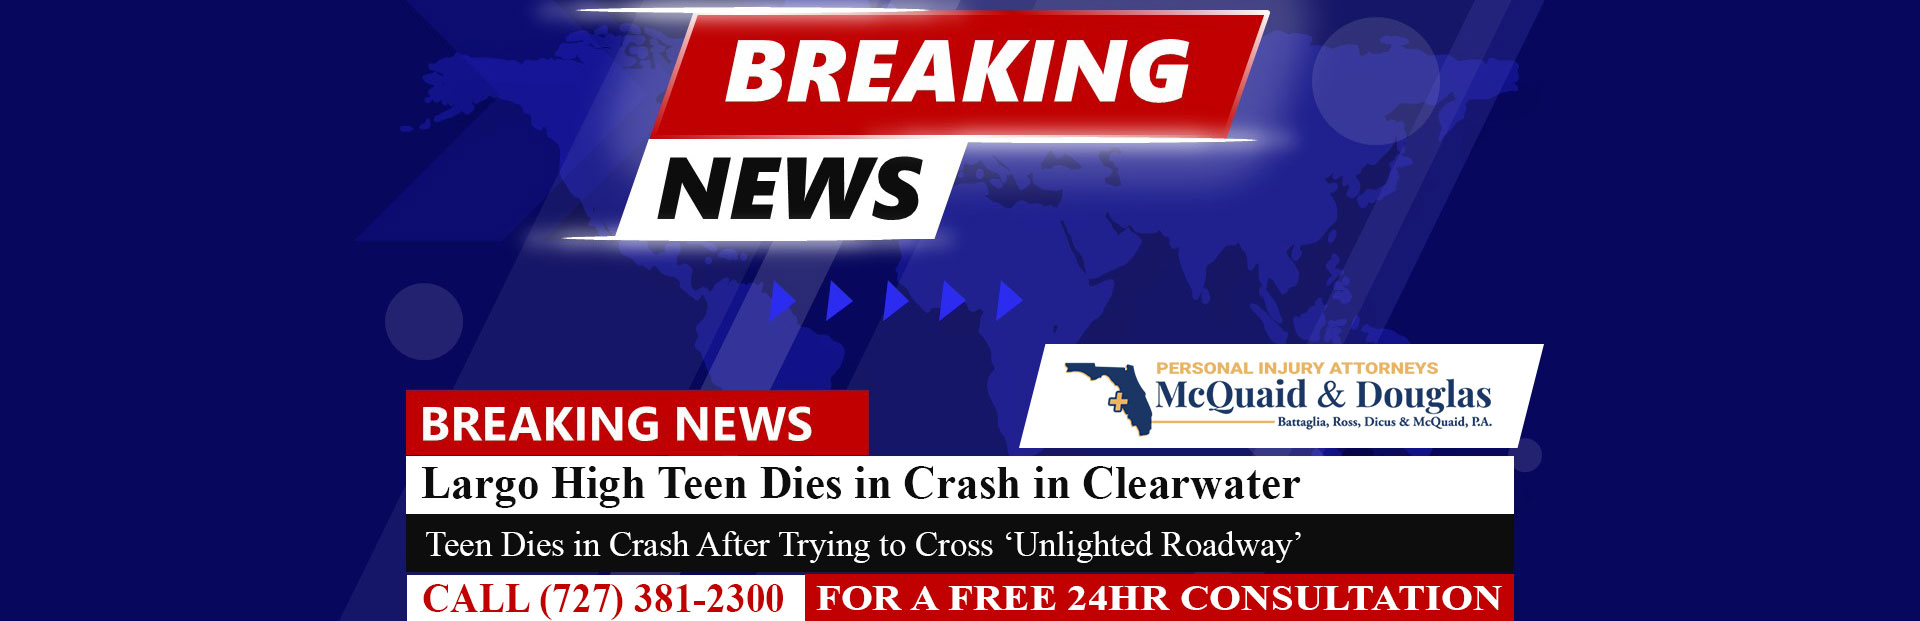 [8-26-22] Largo High Teen Dies in Crash After Trying to Cross ‘Unlighted Roadway,’